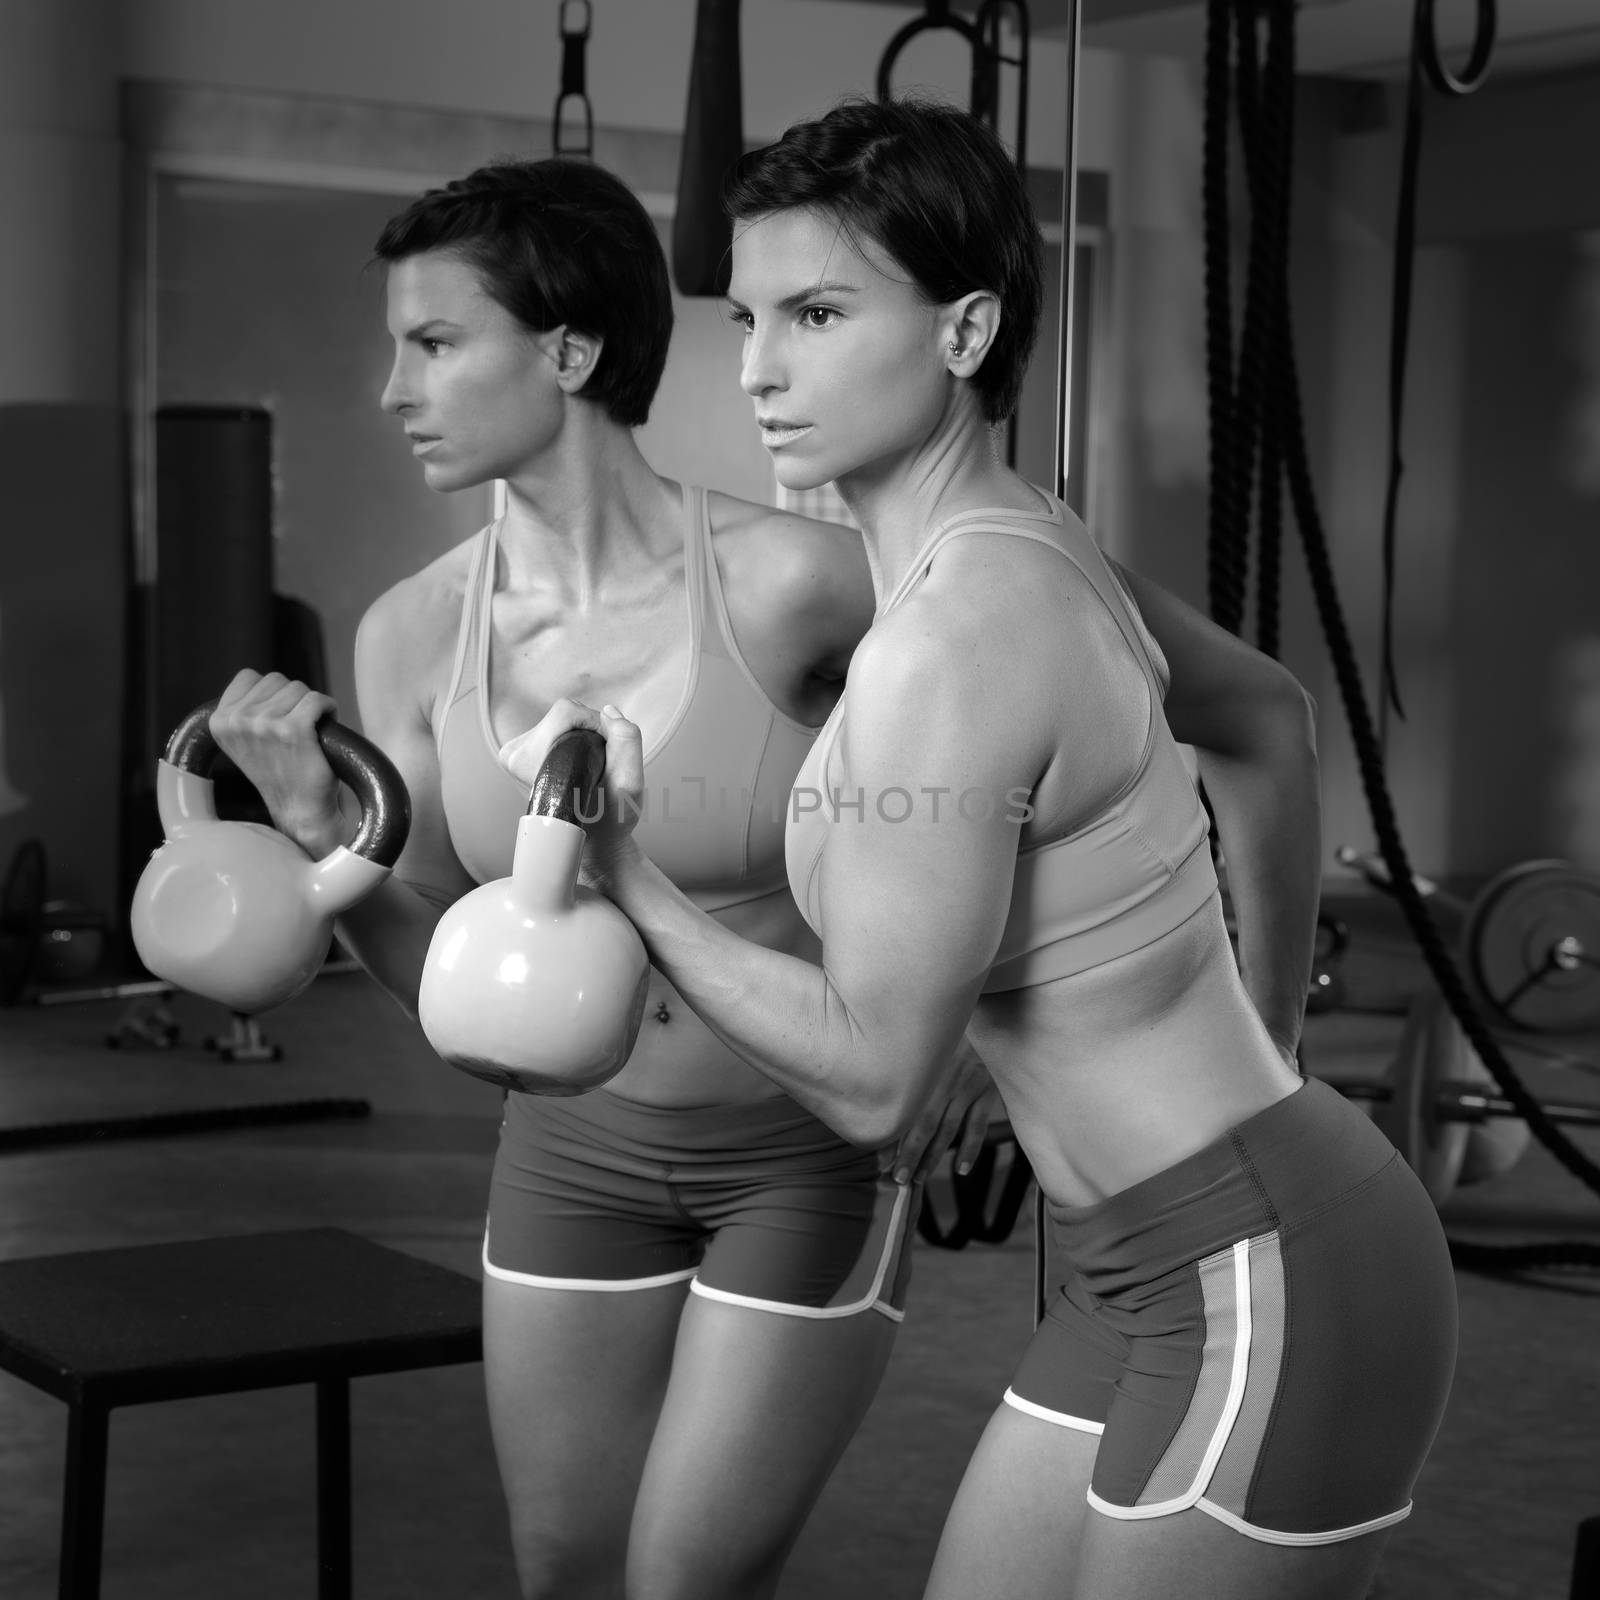 Crossfit fitness weight lifting Kettlebell woman at mirror workout exercise at gym